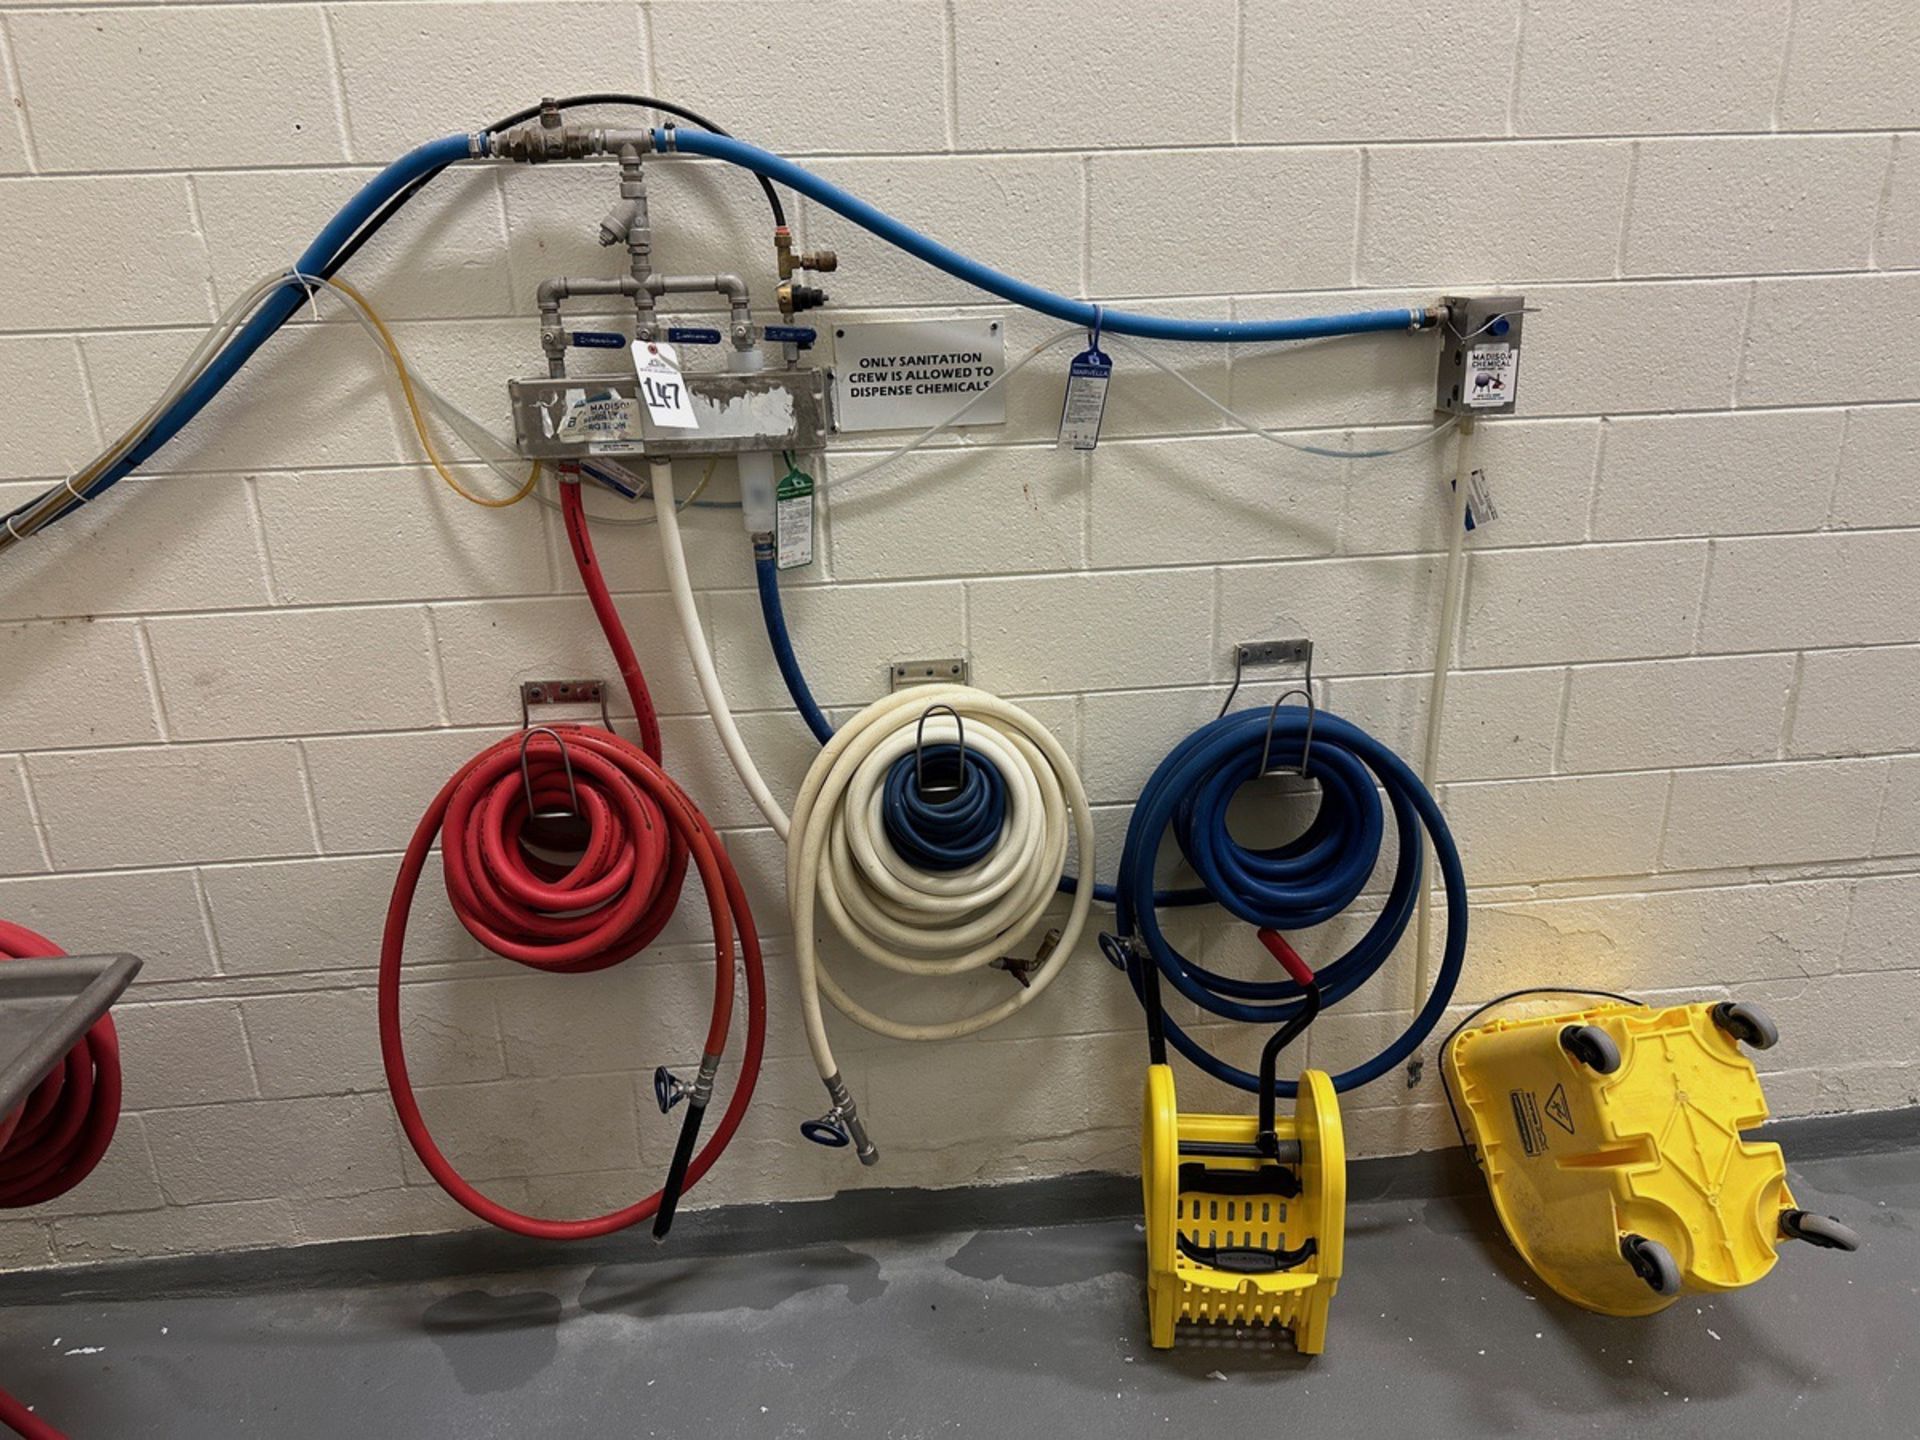 Lot of Chemical Foamers and Heavy Duty Hoses | Rig Fee $100